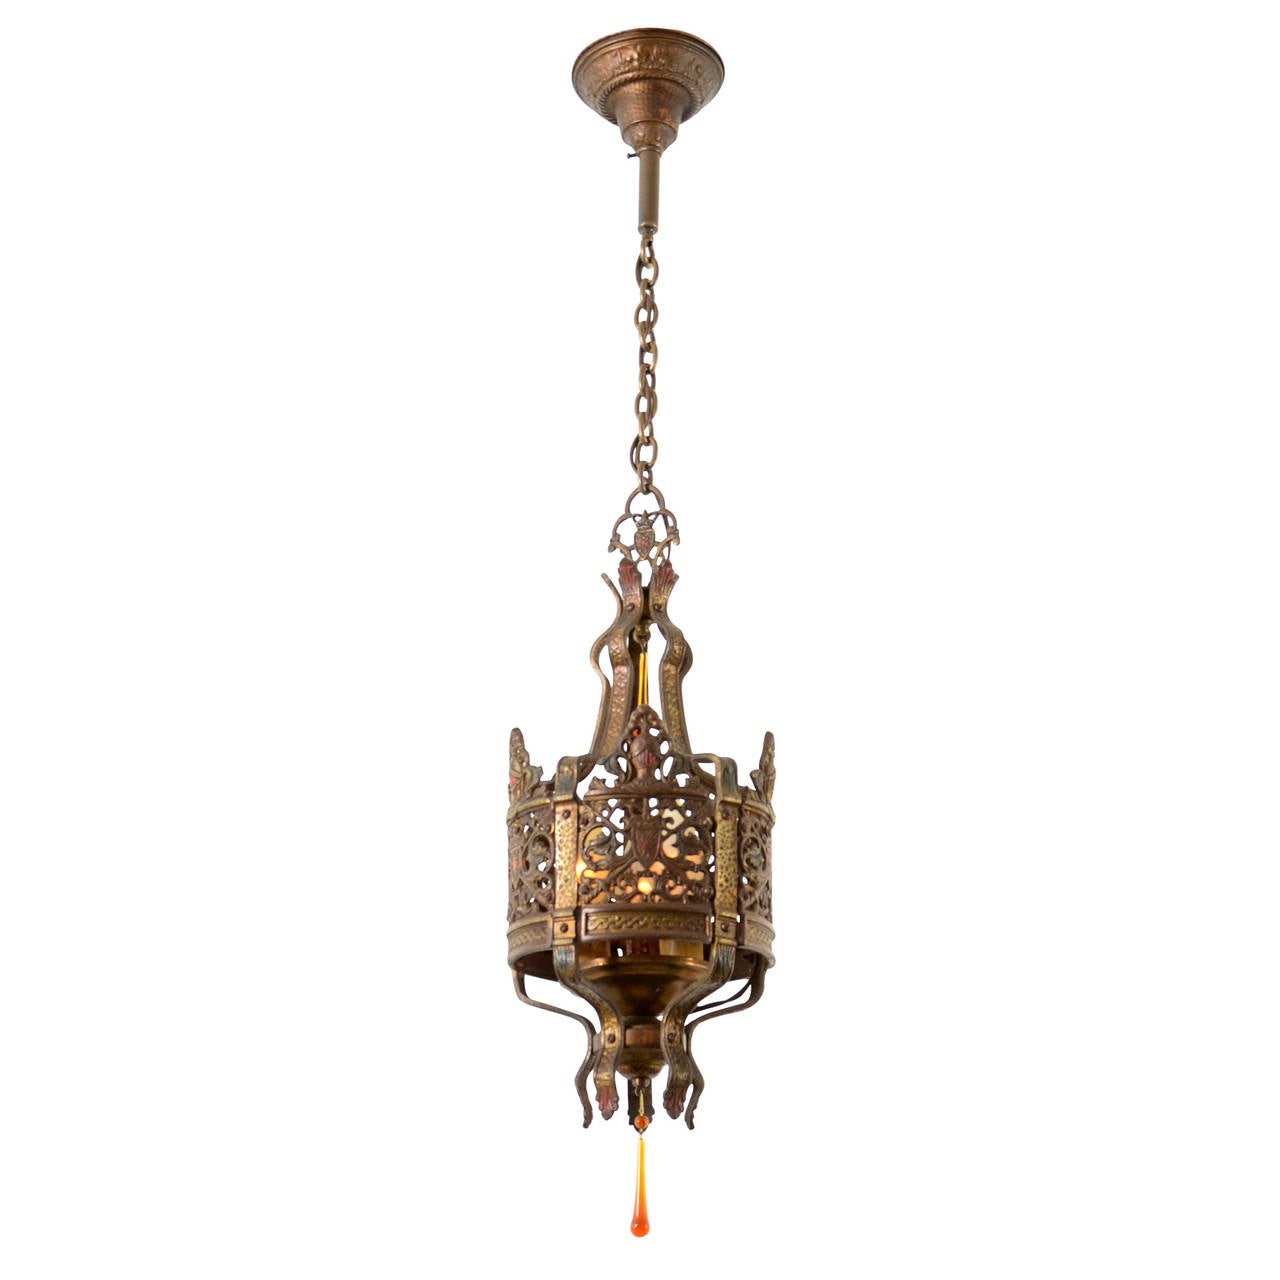 Wrought-iron inspired fixtures like this one were popular in the second half of the 1920s, where they romantically lit countless Tudor, English, and Mediterranean cottages. This example features cameo-style knights' helmets emblazoned upon heraldic